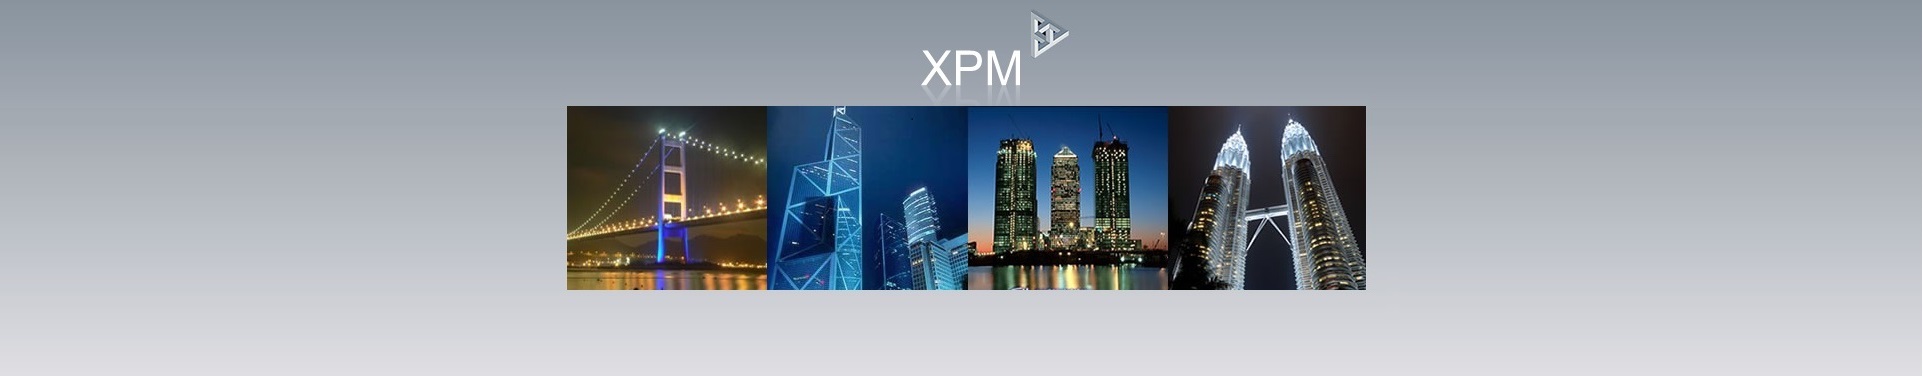 Welcome to XPM User - File Management System